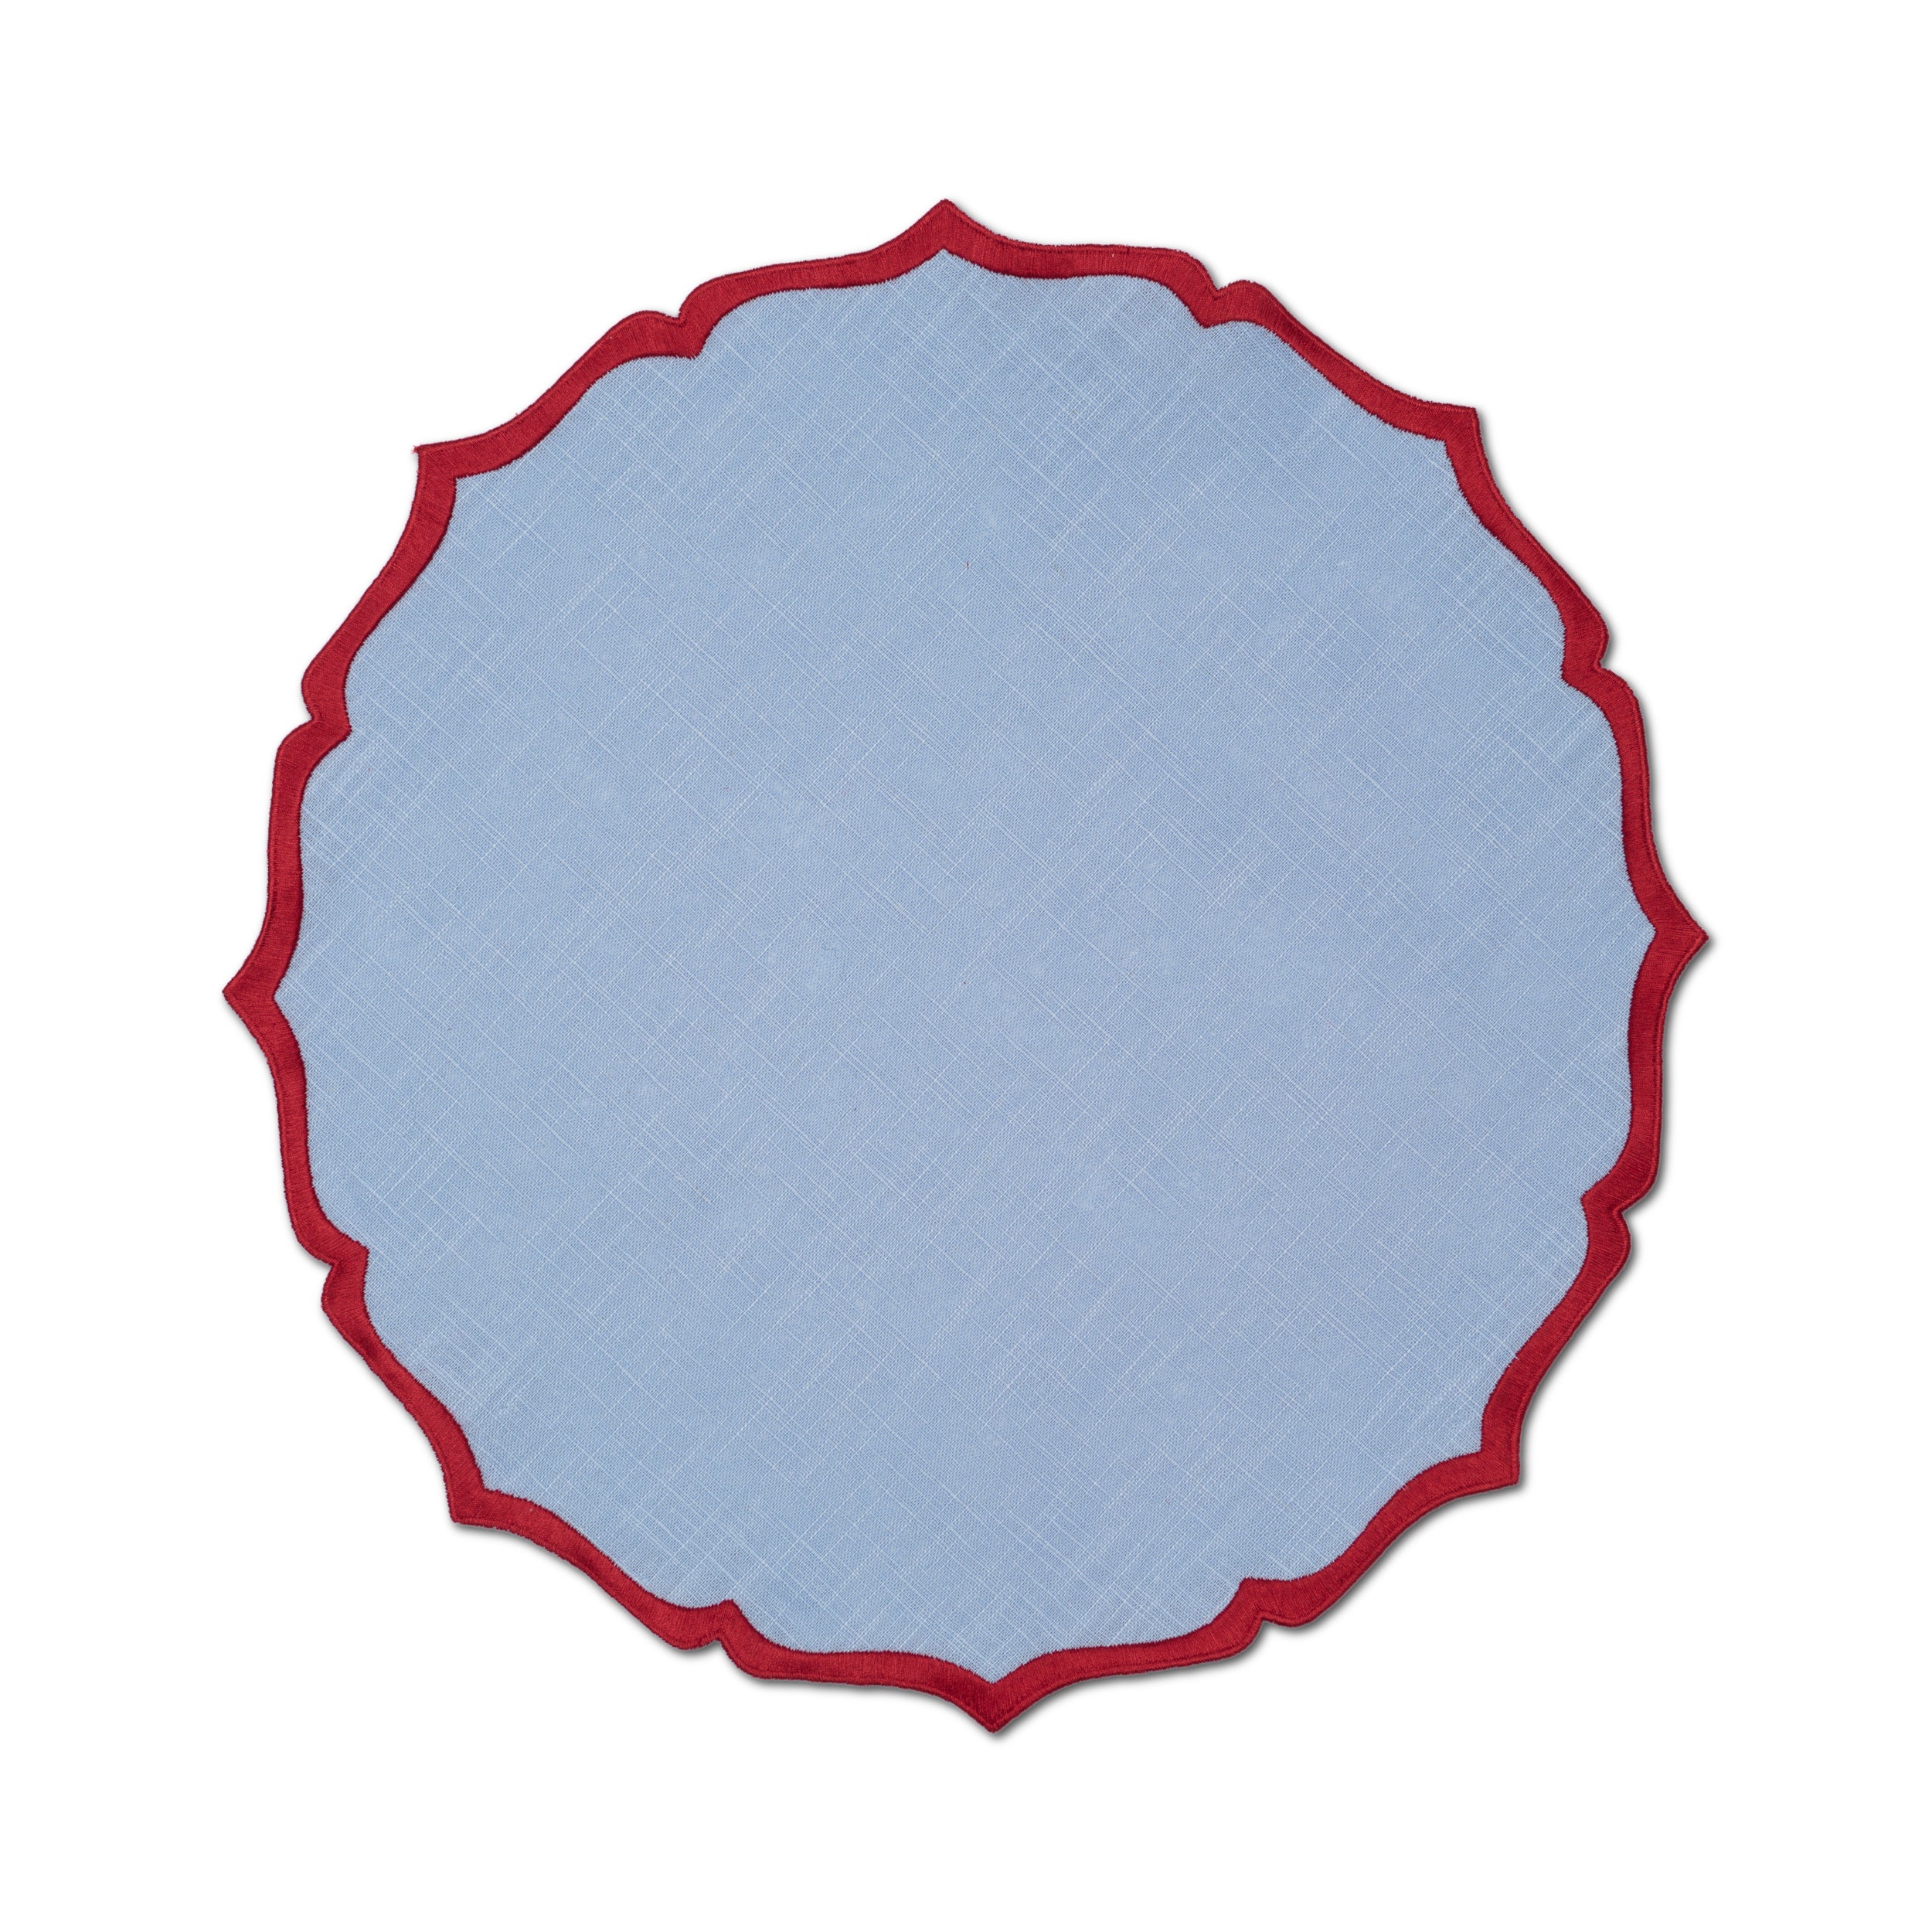 Iza Placemat | Blue Red - set of 4